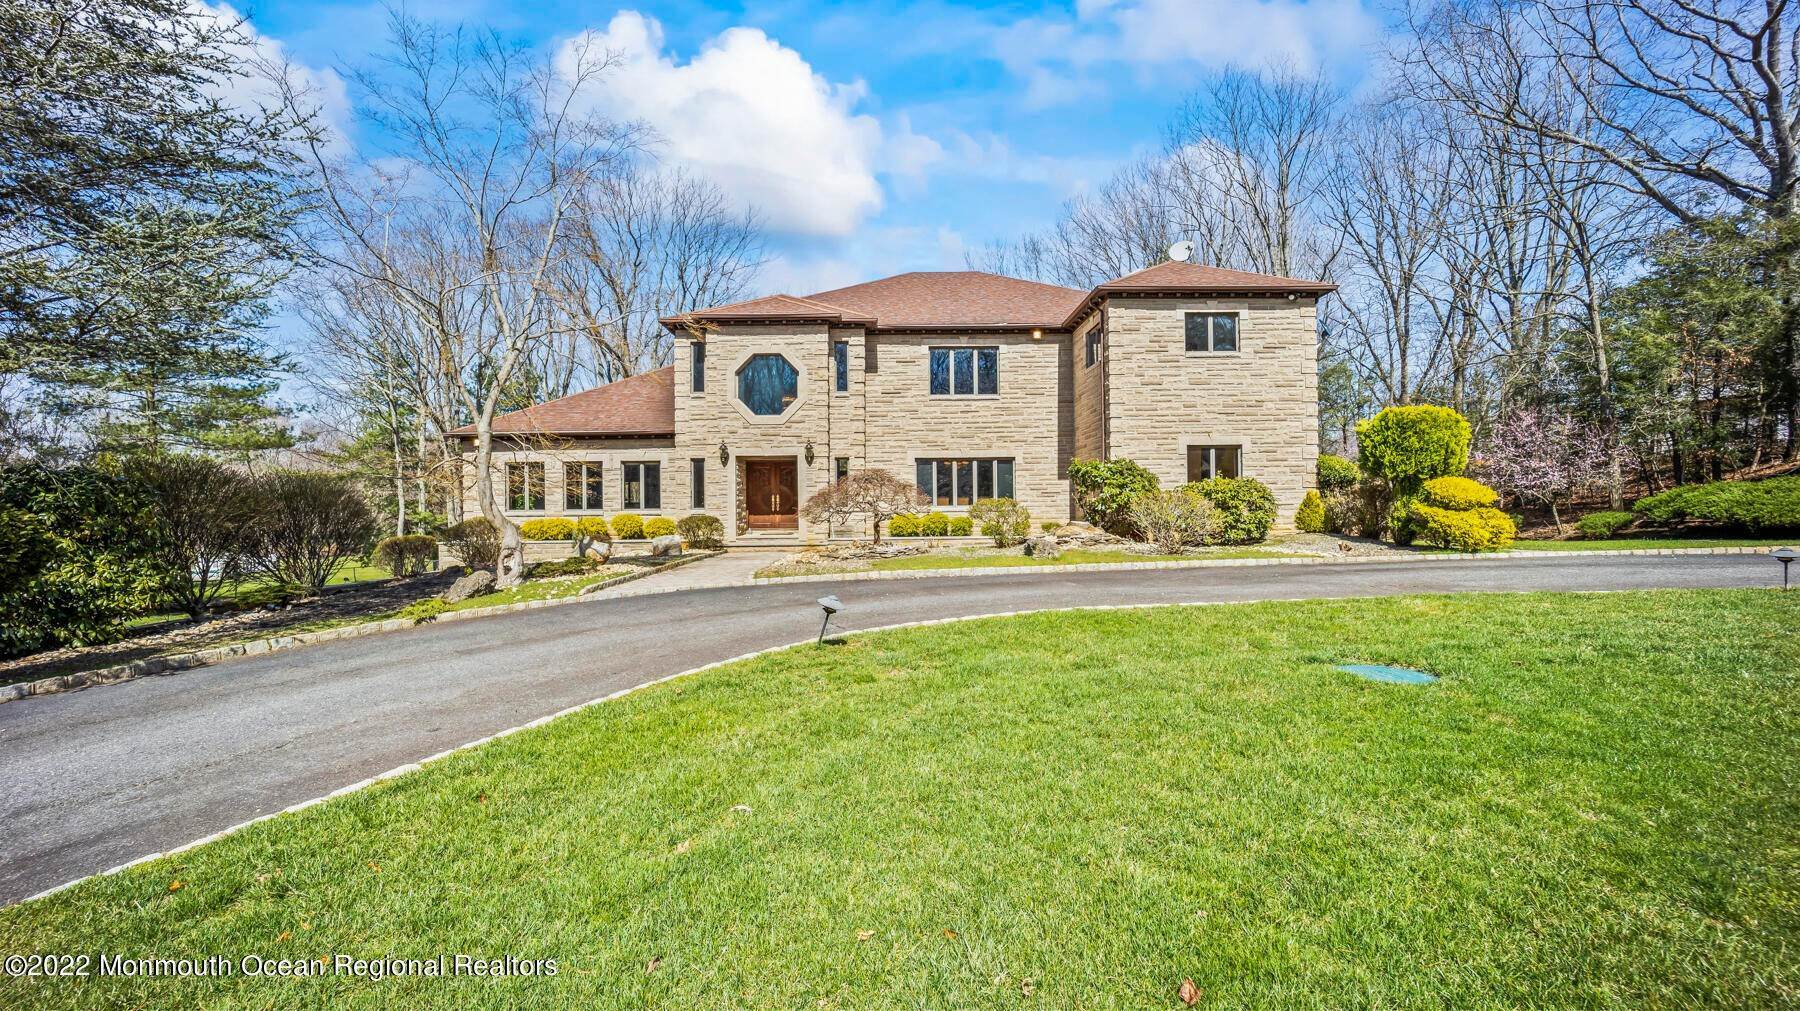 Property for Sale at 48 Cedar Drive Colts Neck, New Jersey 07722 United States